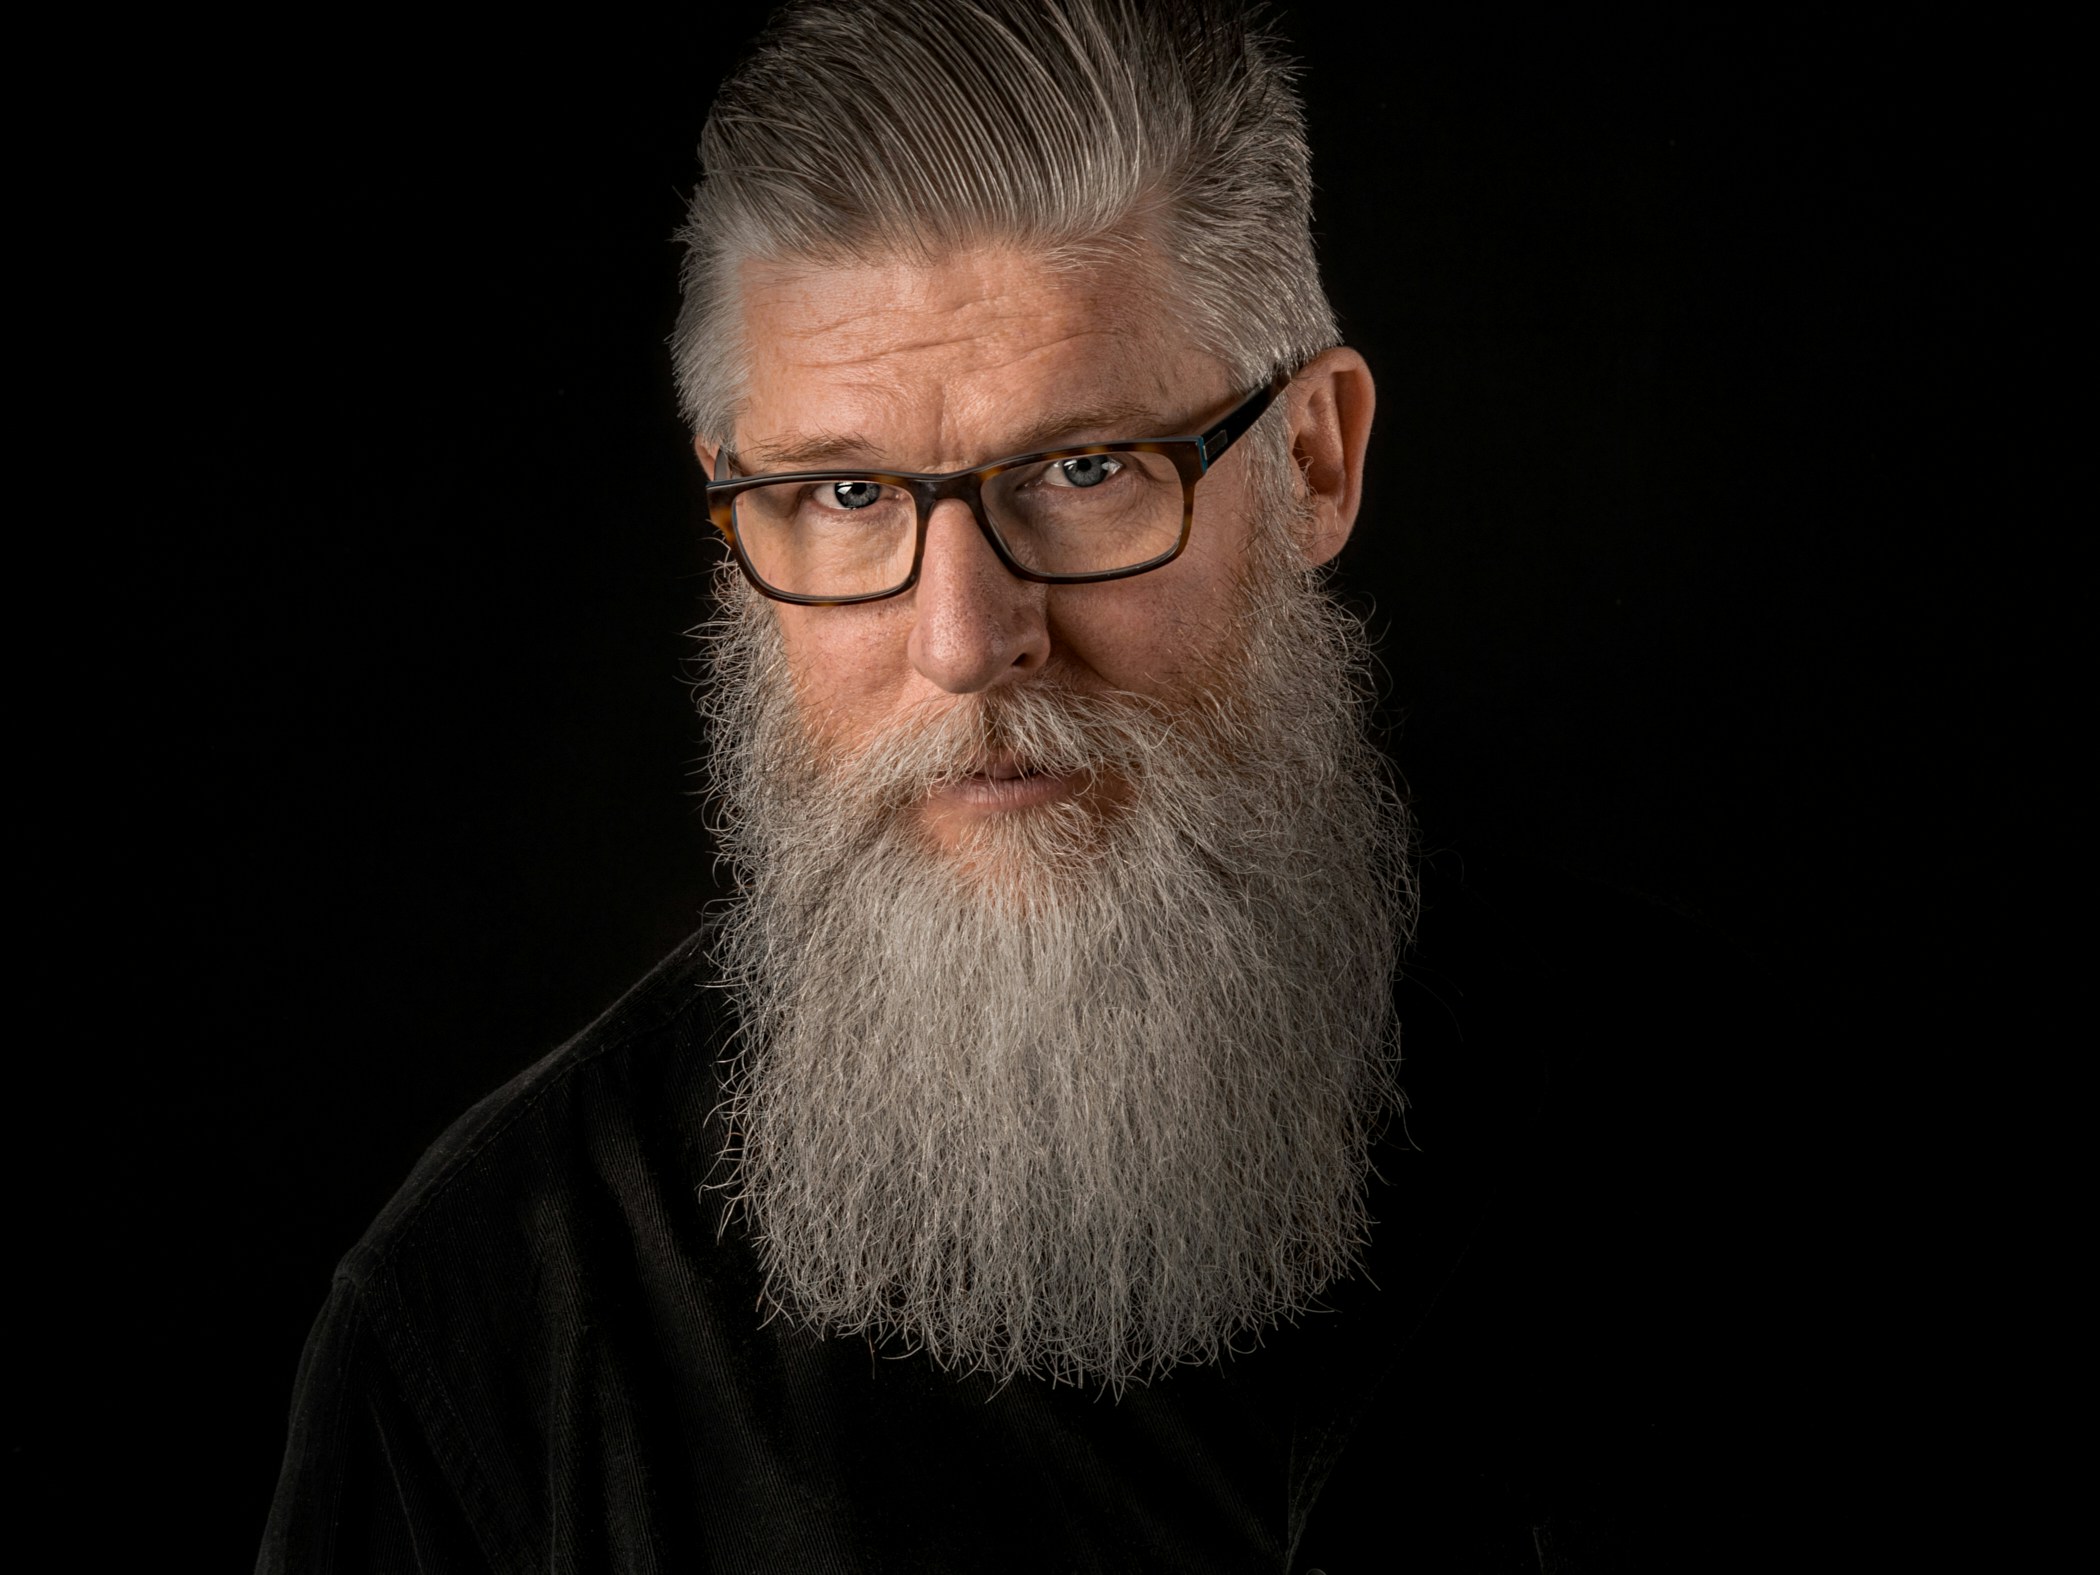 a bald, bearded man with glasses on looking serious